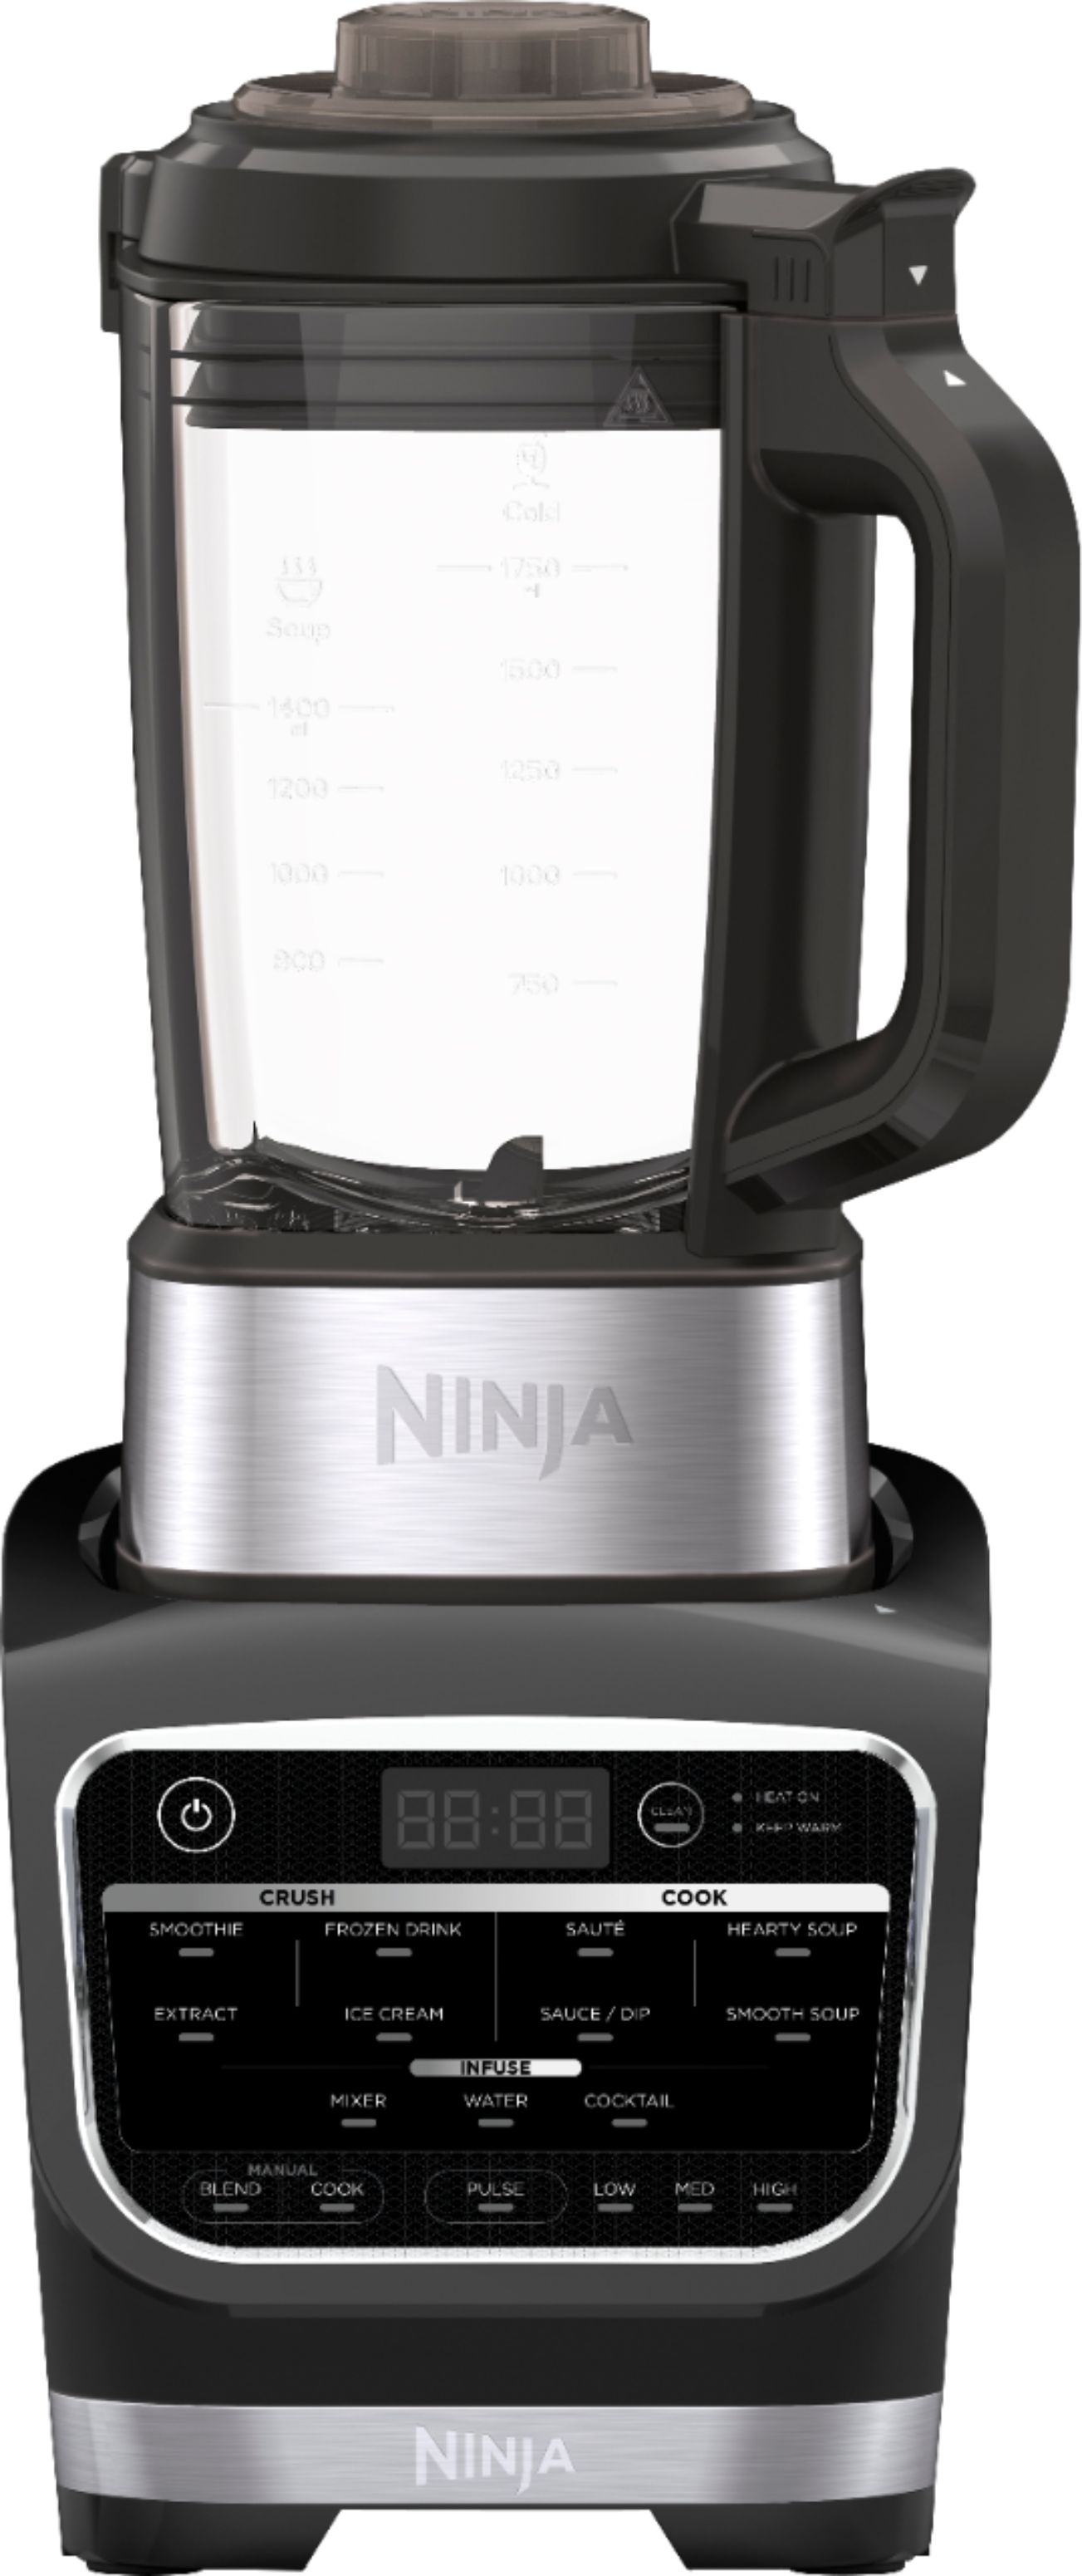 Best Stand Blender Brands For Cooking Hot And Cold Food